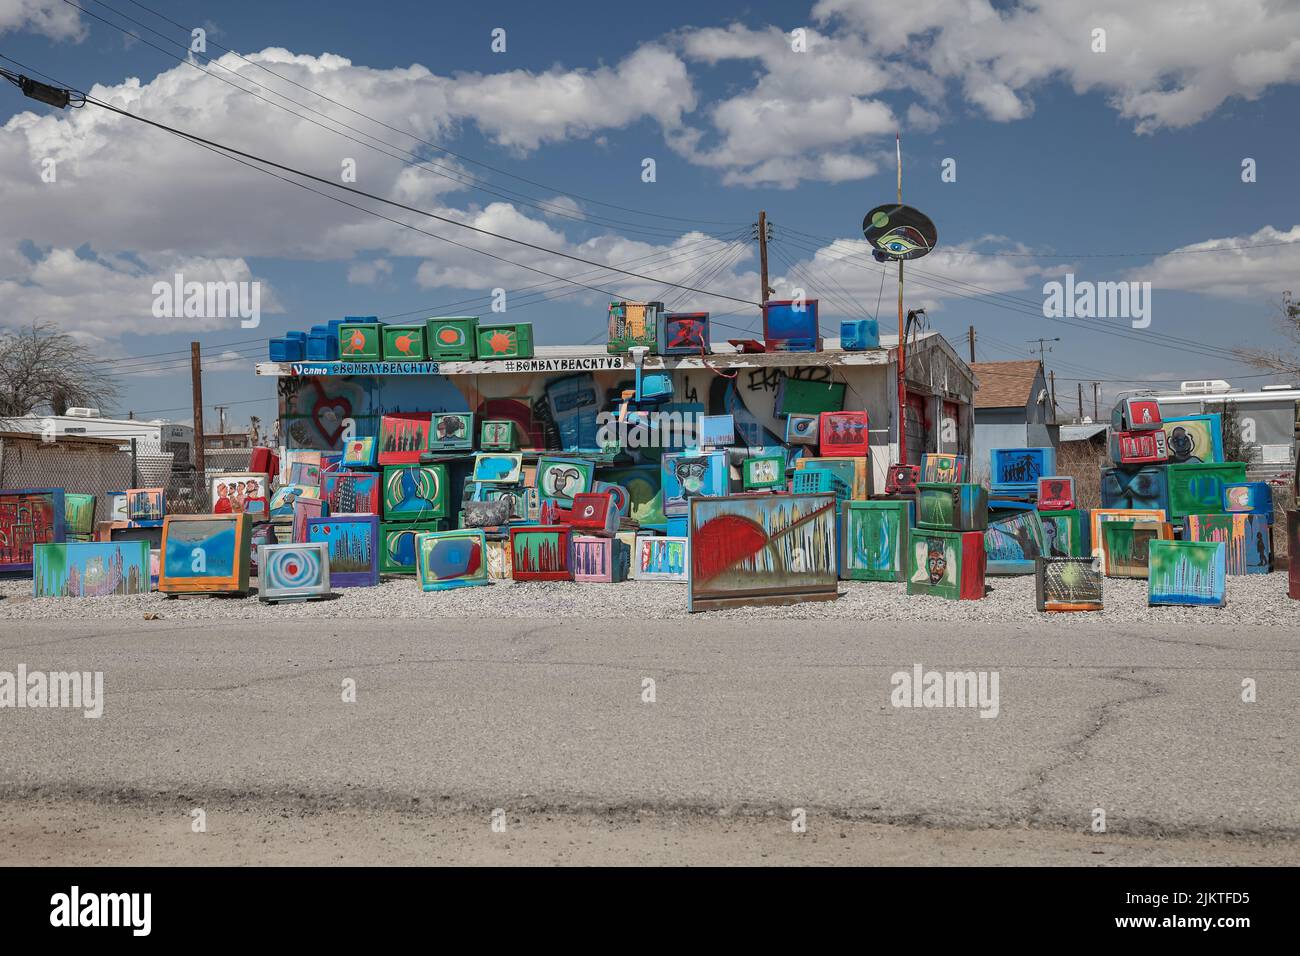 An abandoned lot is one of the spaces transformed with public installations of art in the town of Bombay Beach. Stock Photo